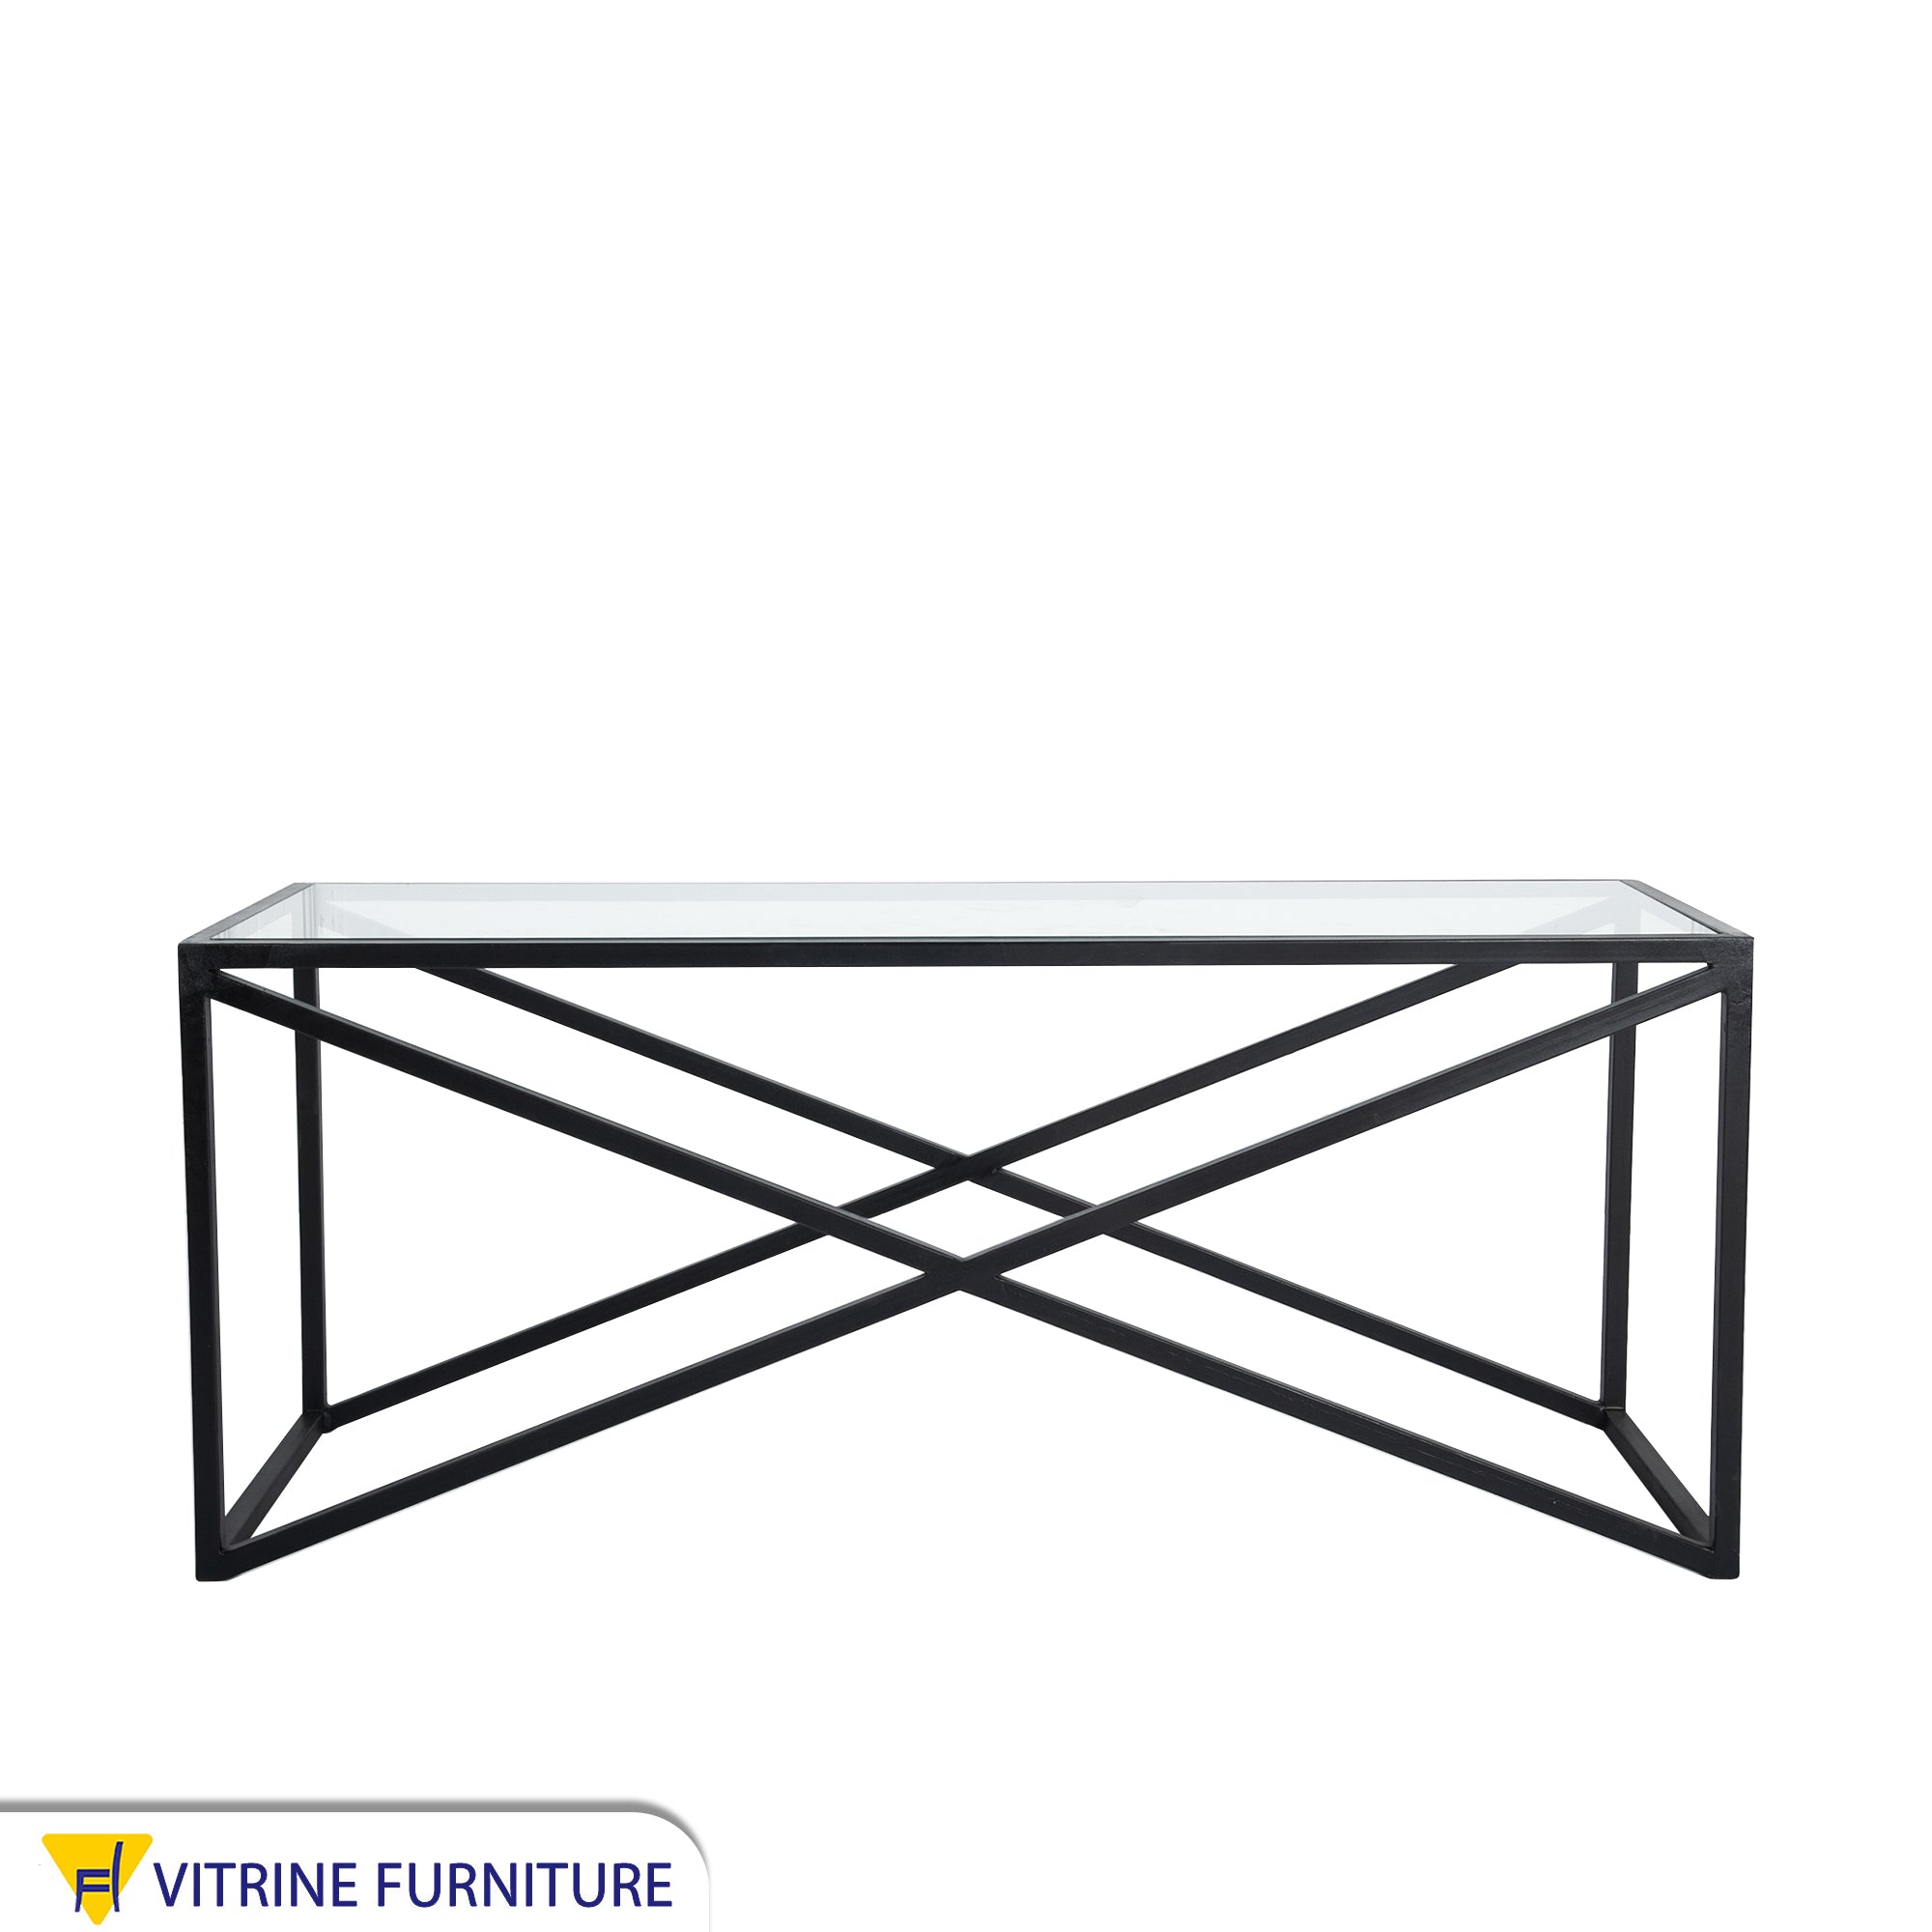 Rectangular table with an X-shaped structure in black